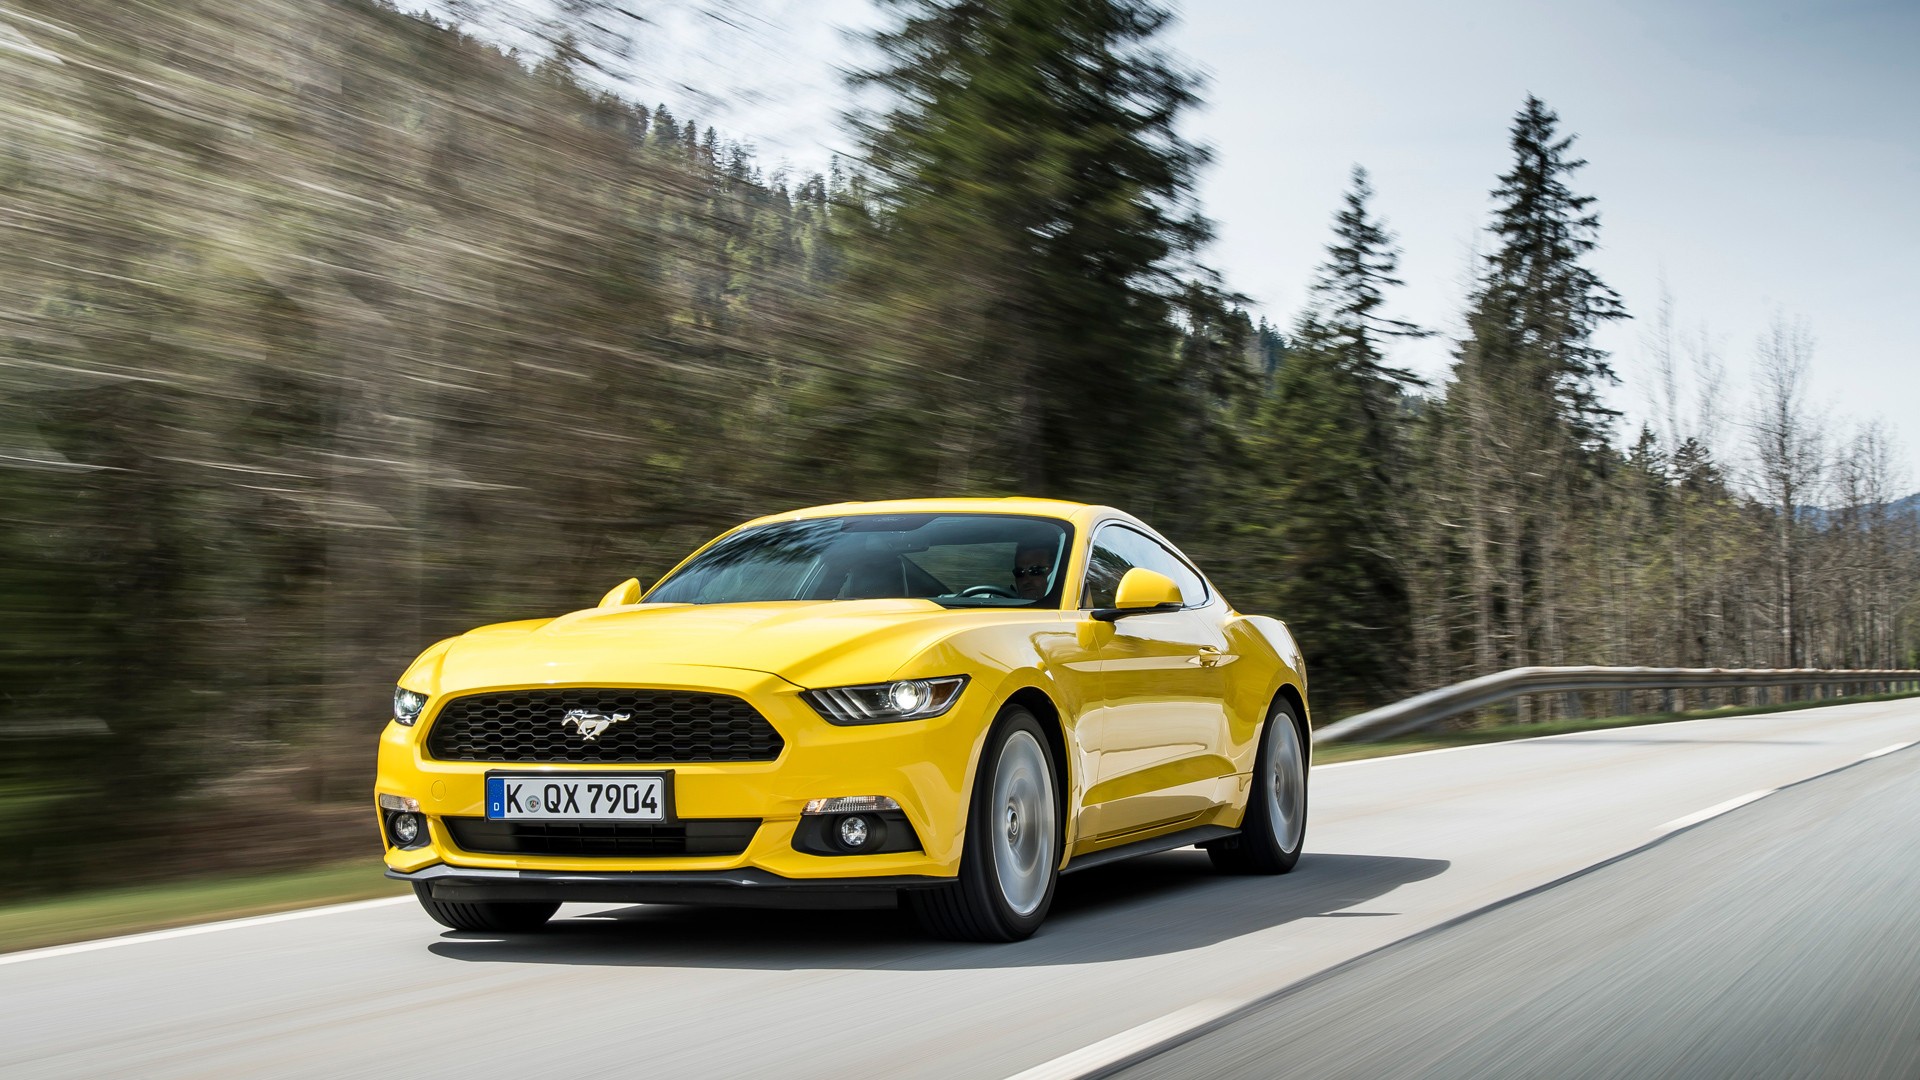 General 1920x1080 Ford Mustang car motion blur road Ford yellow cars vehicle numbers Ford Mustang S550 muscle cars American cars